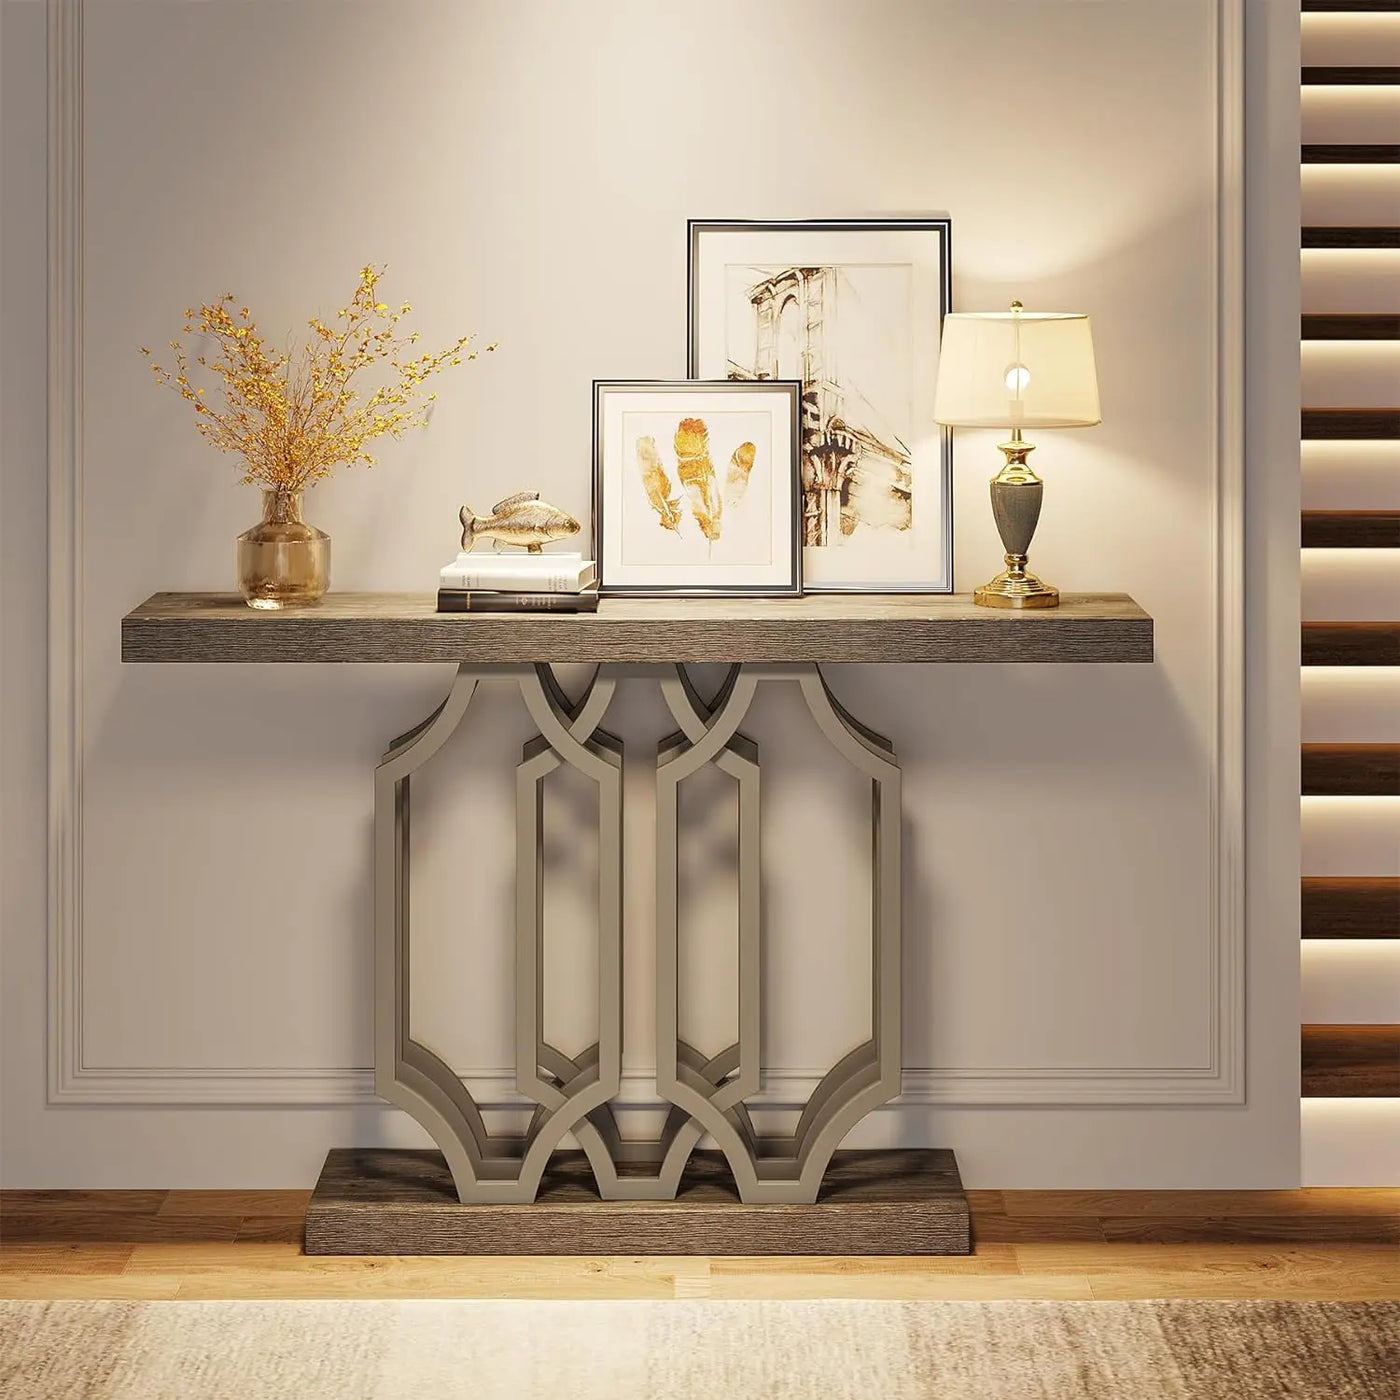 Hills Console Table | Farmhouse Wooden Entryway Hallway Table with Geometric Metal Legs,